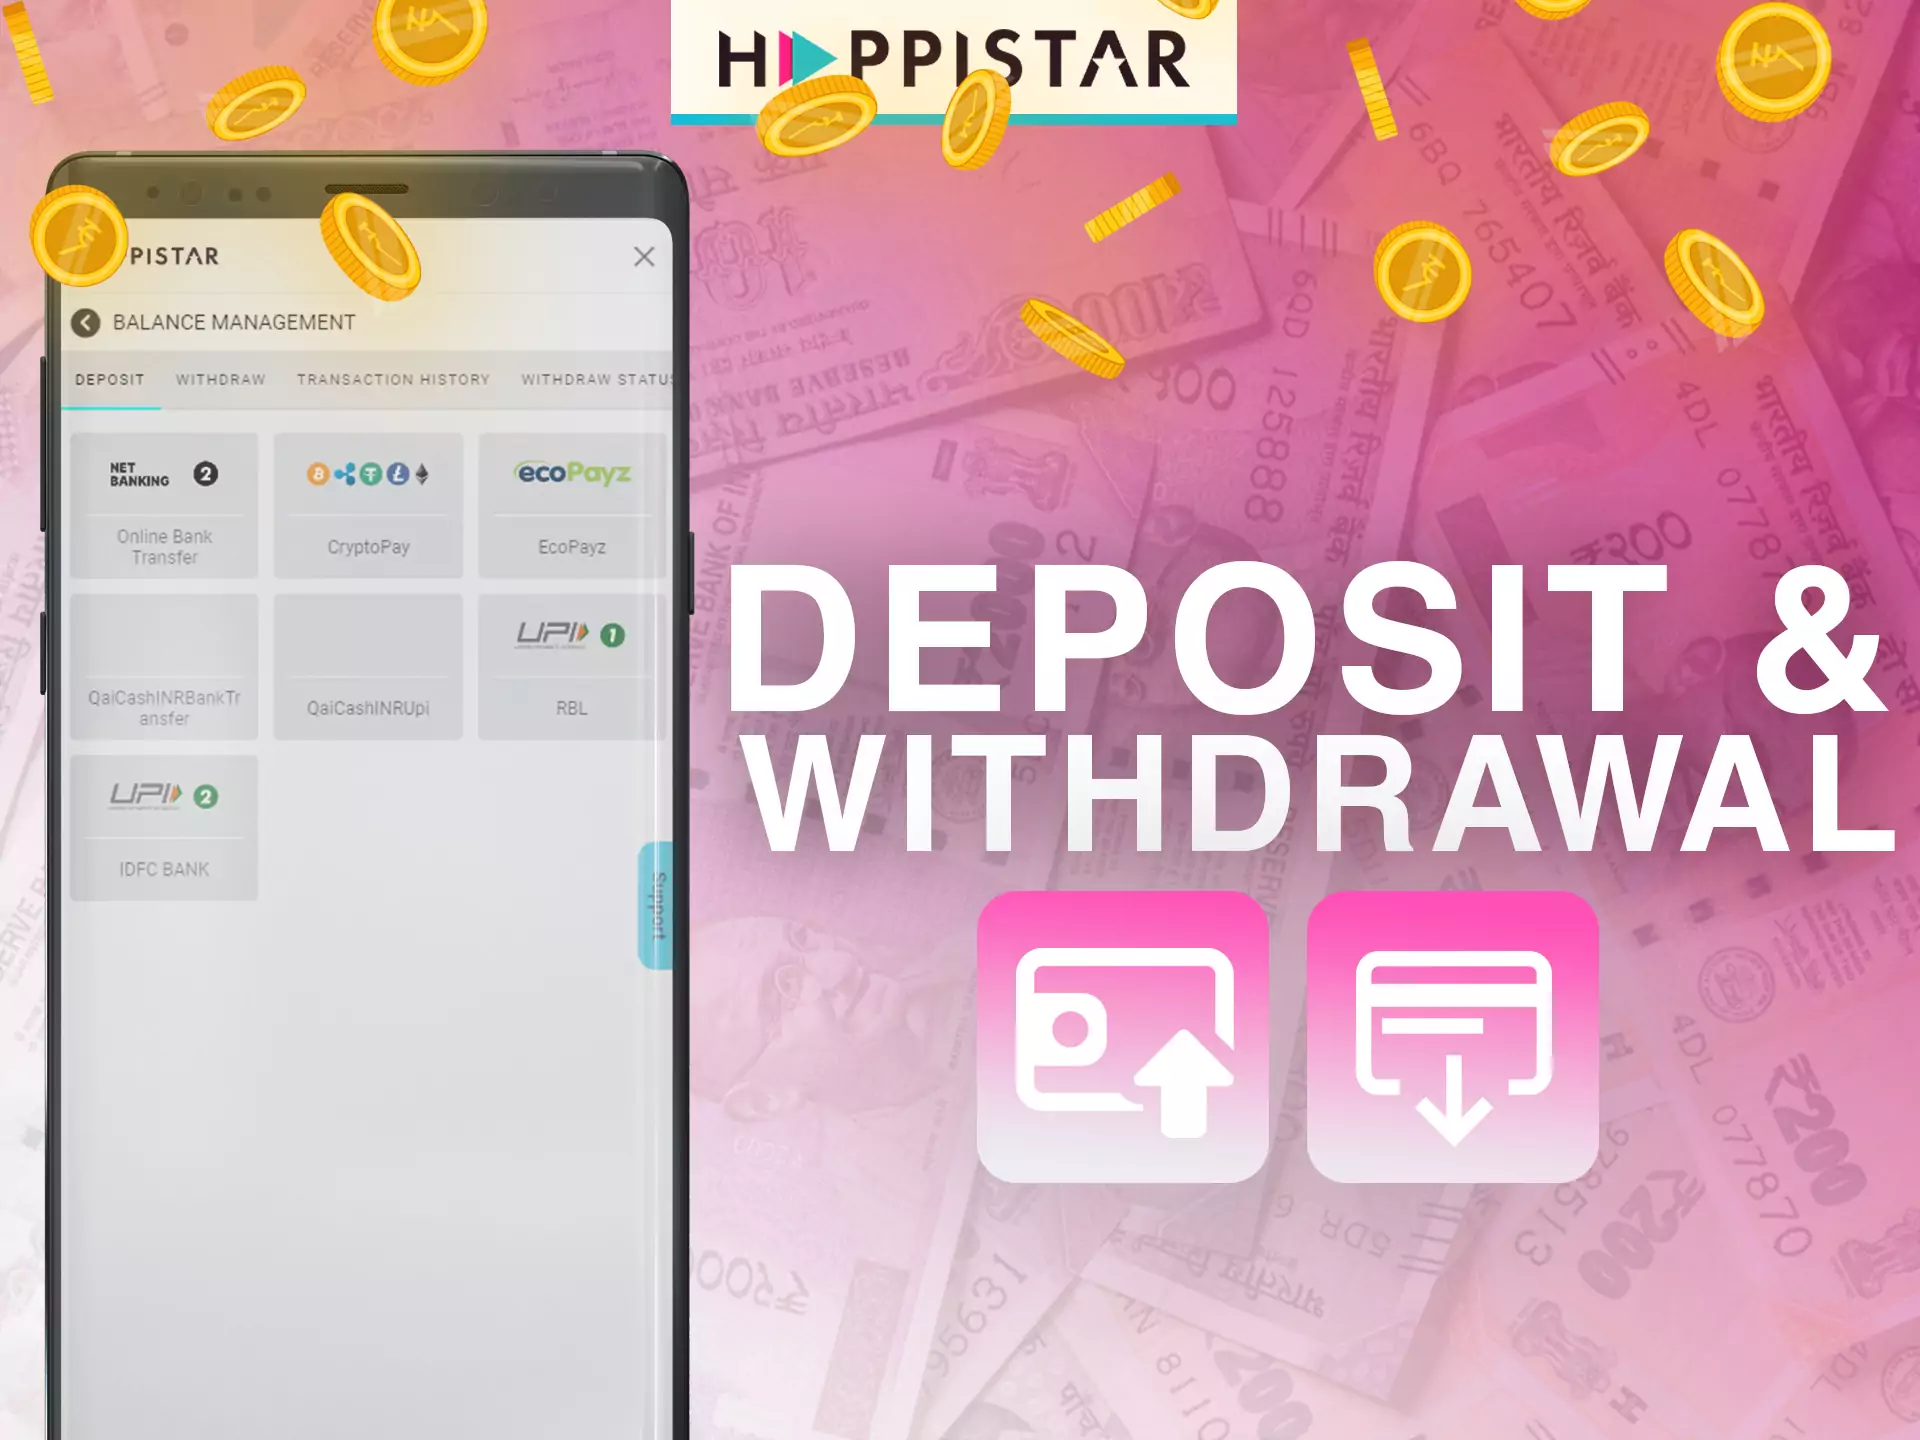 Use a cashier to top up an account or withdraw money from Happistar.